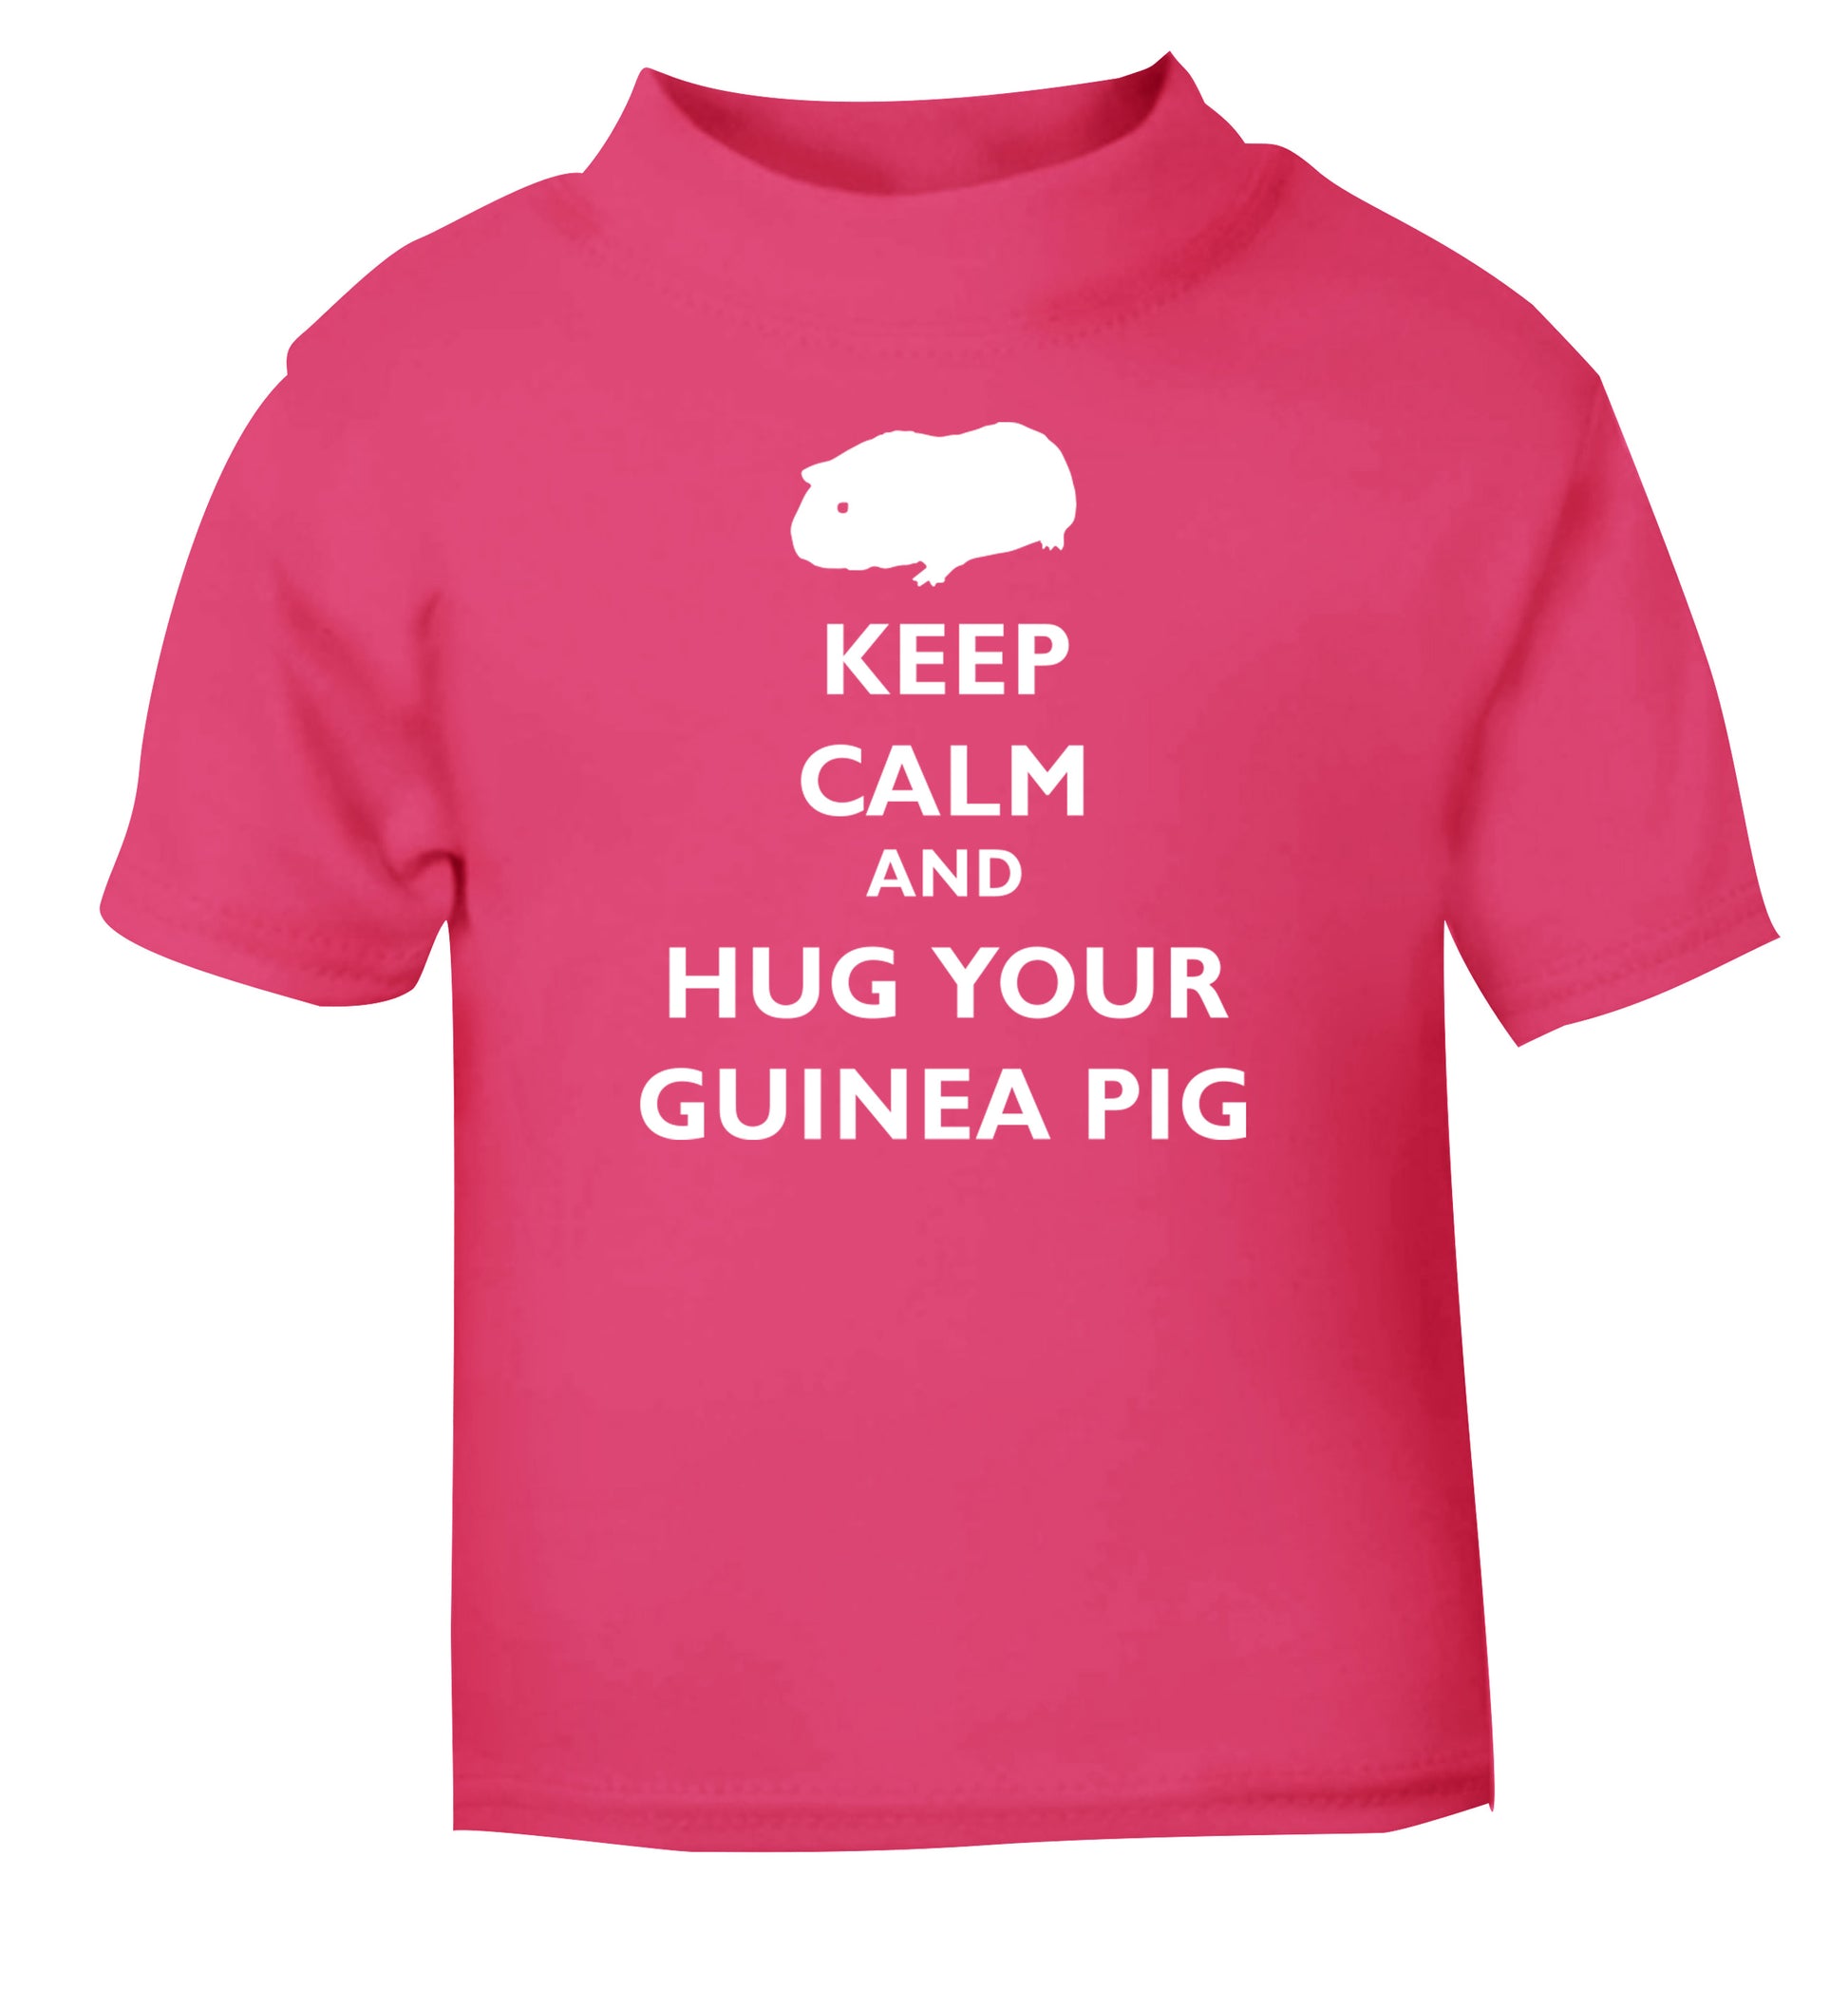 Keep calm and hug your guineapig pink Baby Toddler Tshirt 2 Years